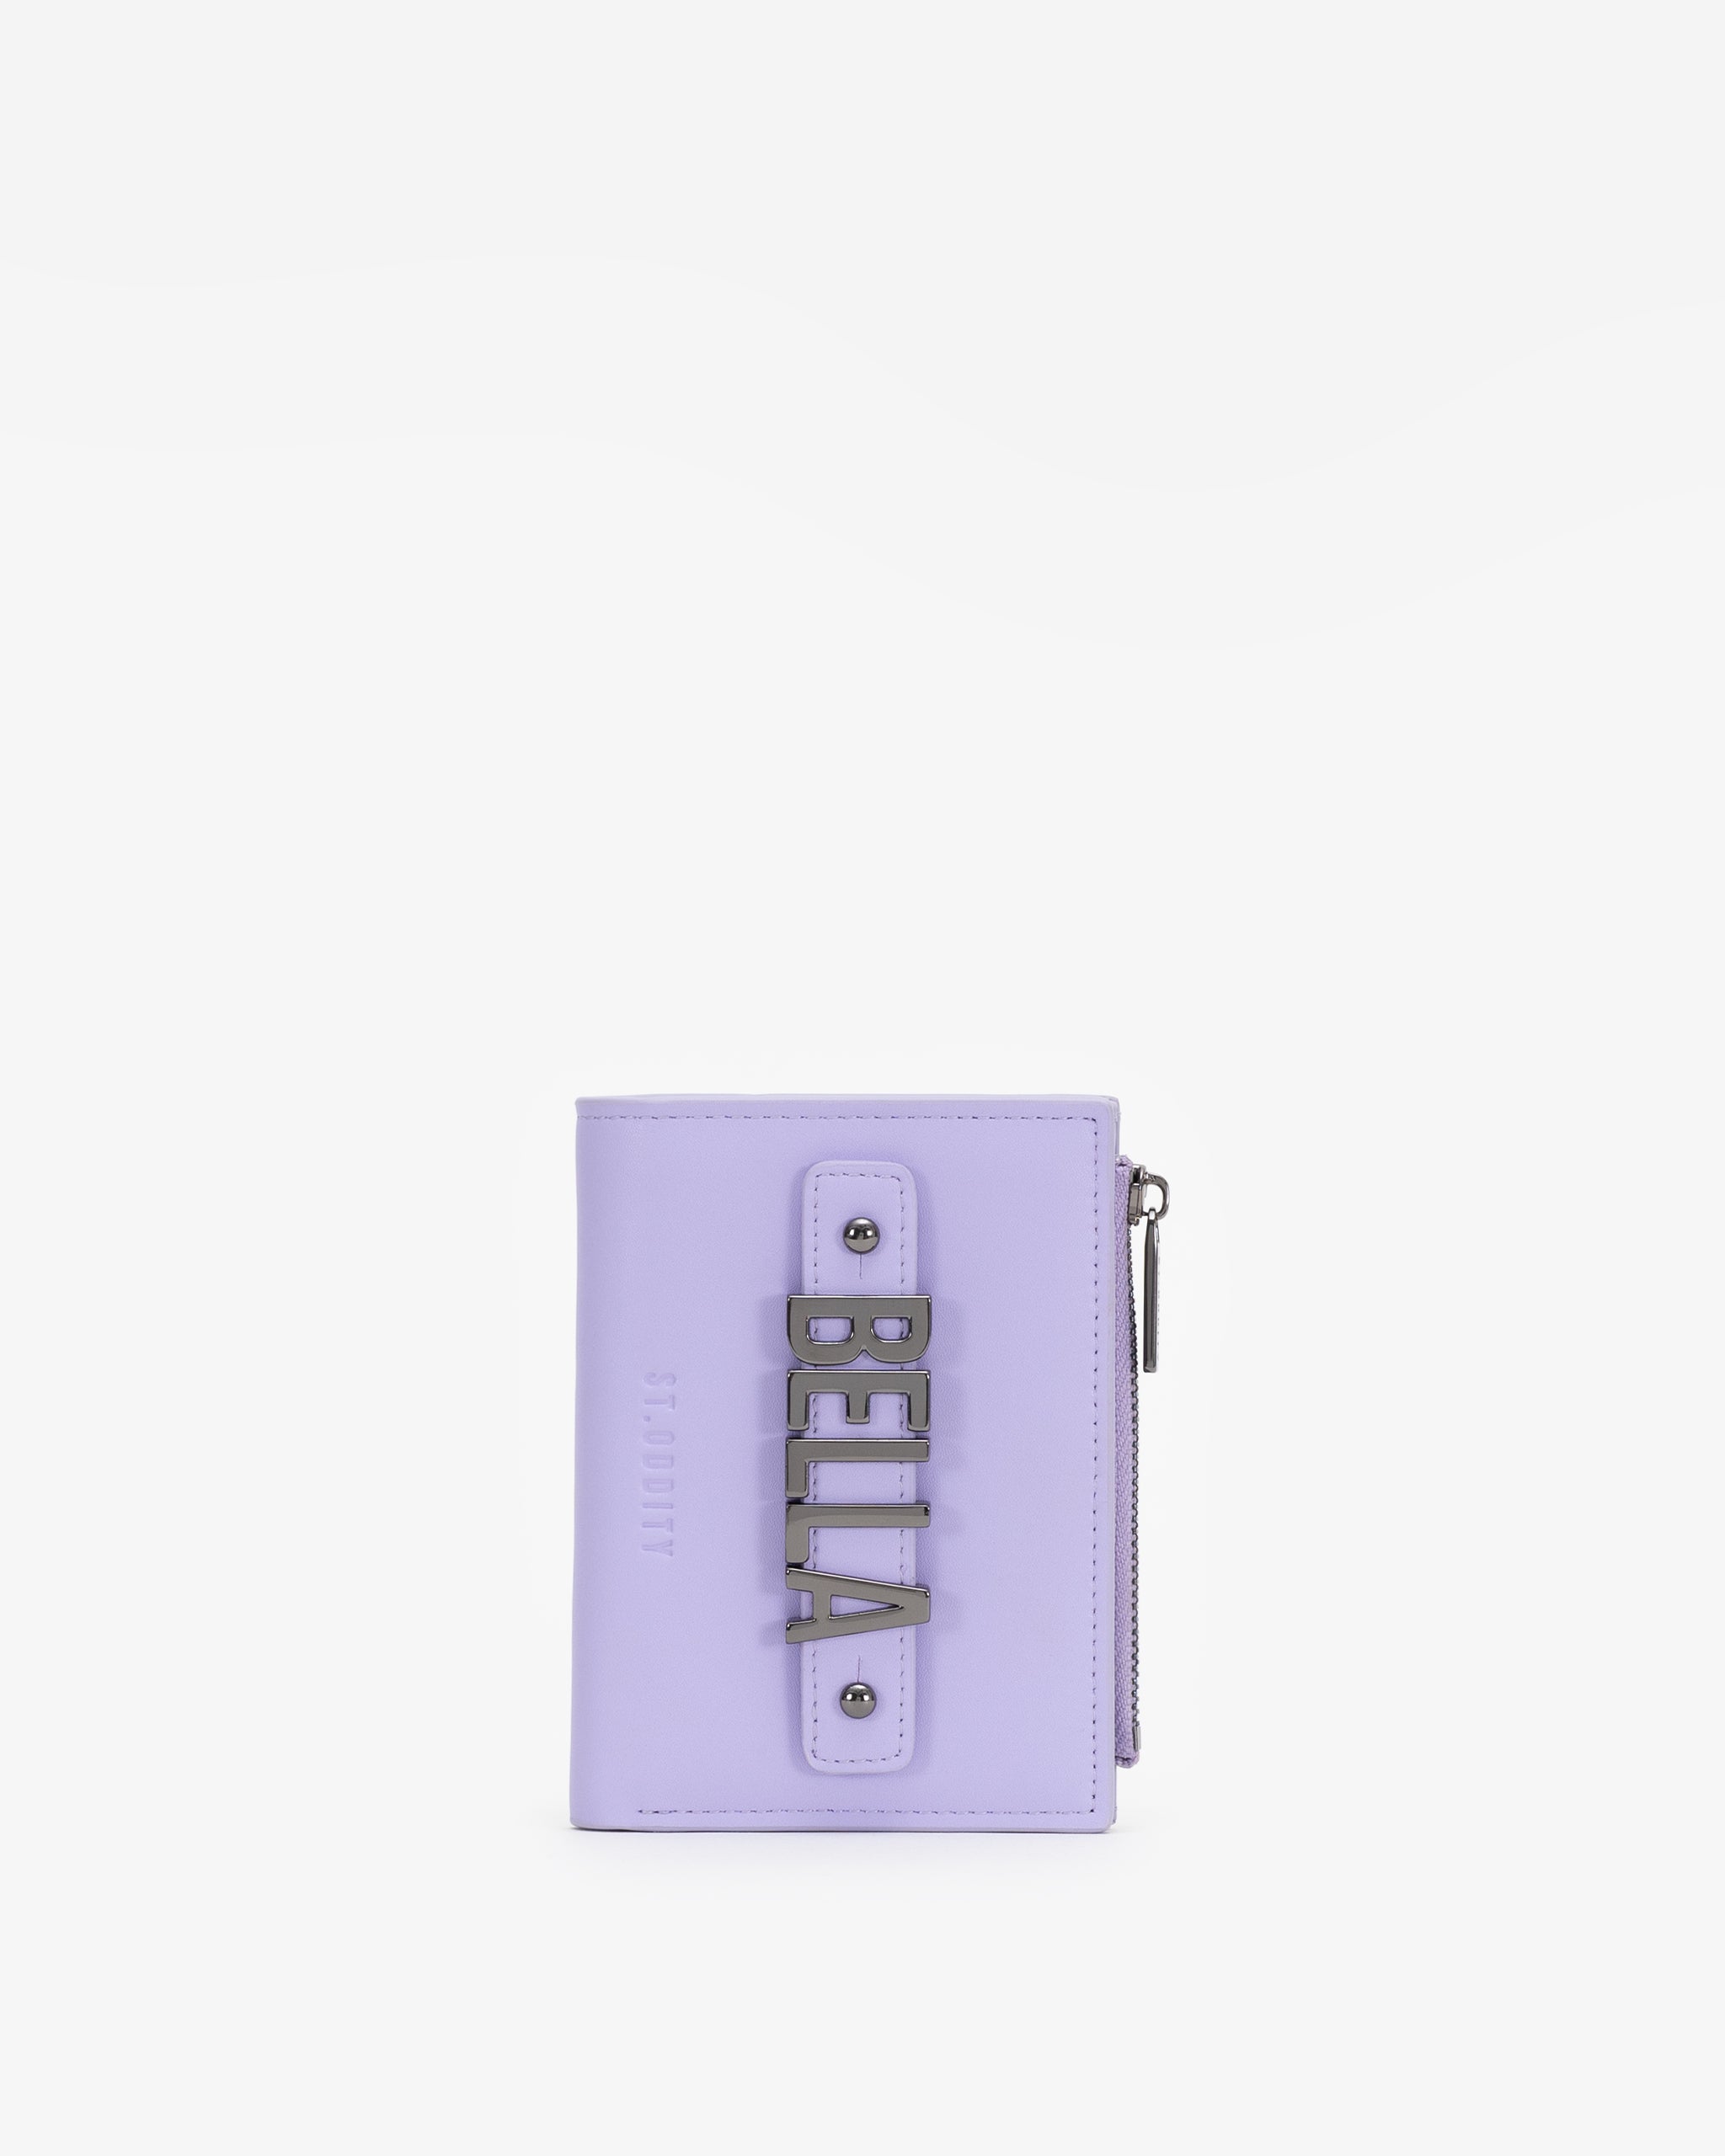 Pre-order (Mid-May): Wallet in Lavender with Personalised Hardware